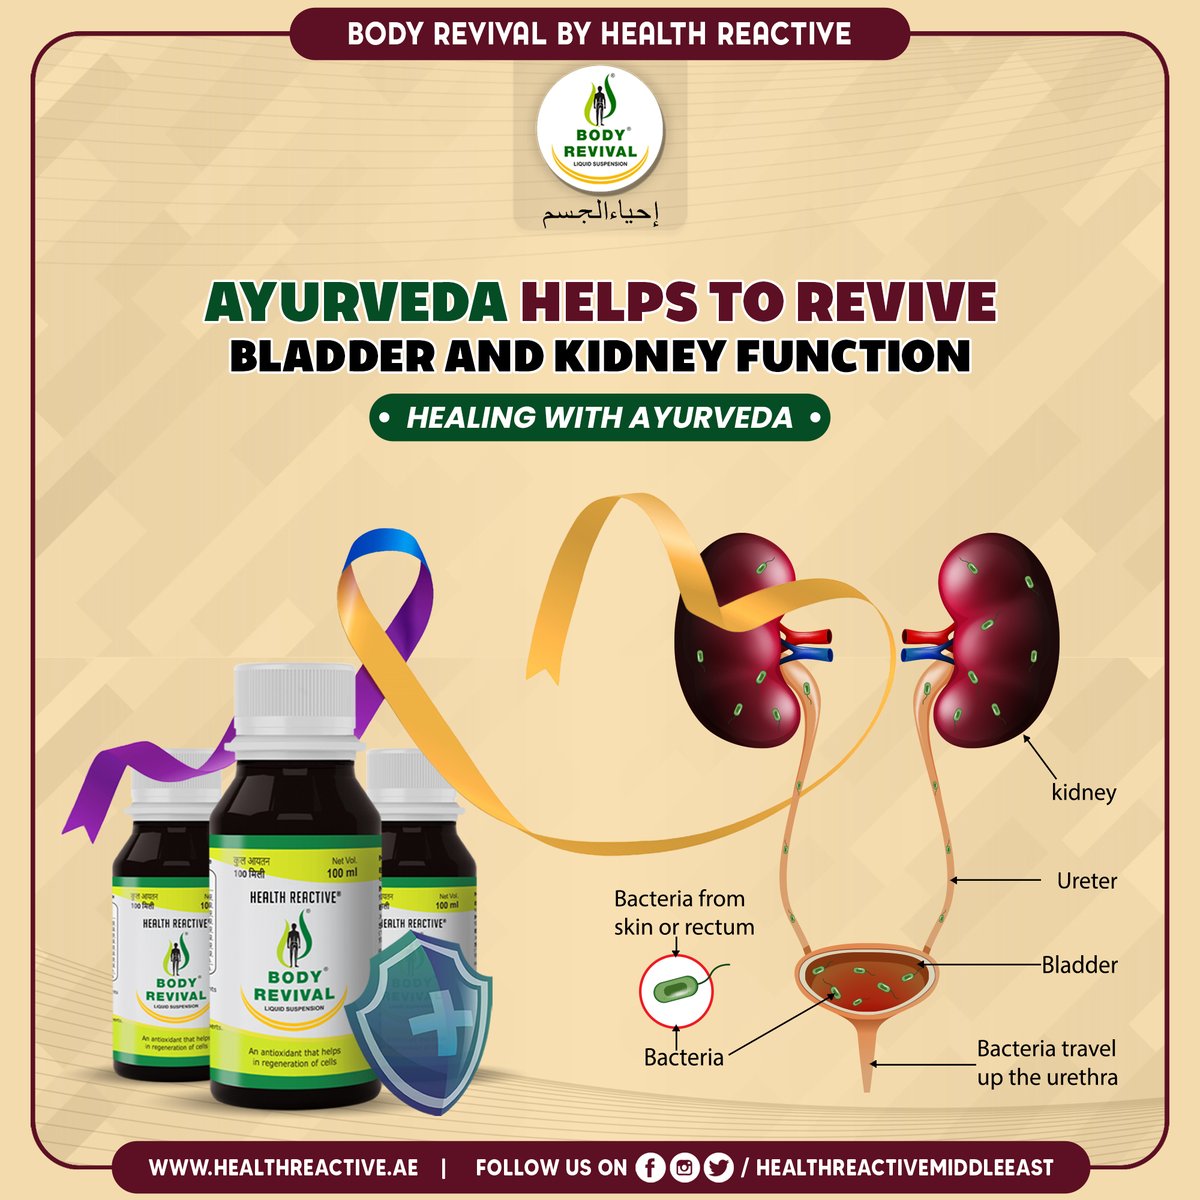 Ayurveda offers natural remedies to revive bladder health, utilizing herbs like Gokshura & Punarnava to strengthen bladder muscles & promote urinary function.

For More Follow Us
healthreactive.ae

#bladder #immunebooster #HealthReactive #bodyrevival #DrMunirKhan